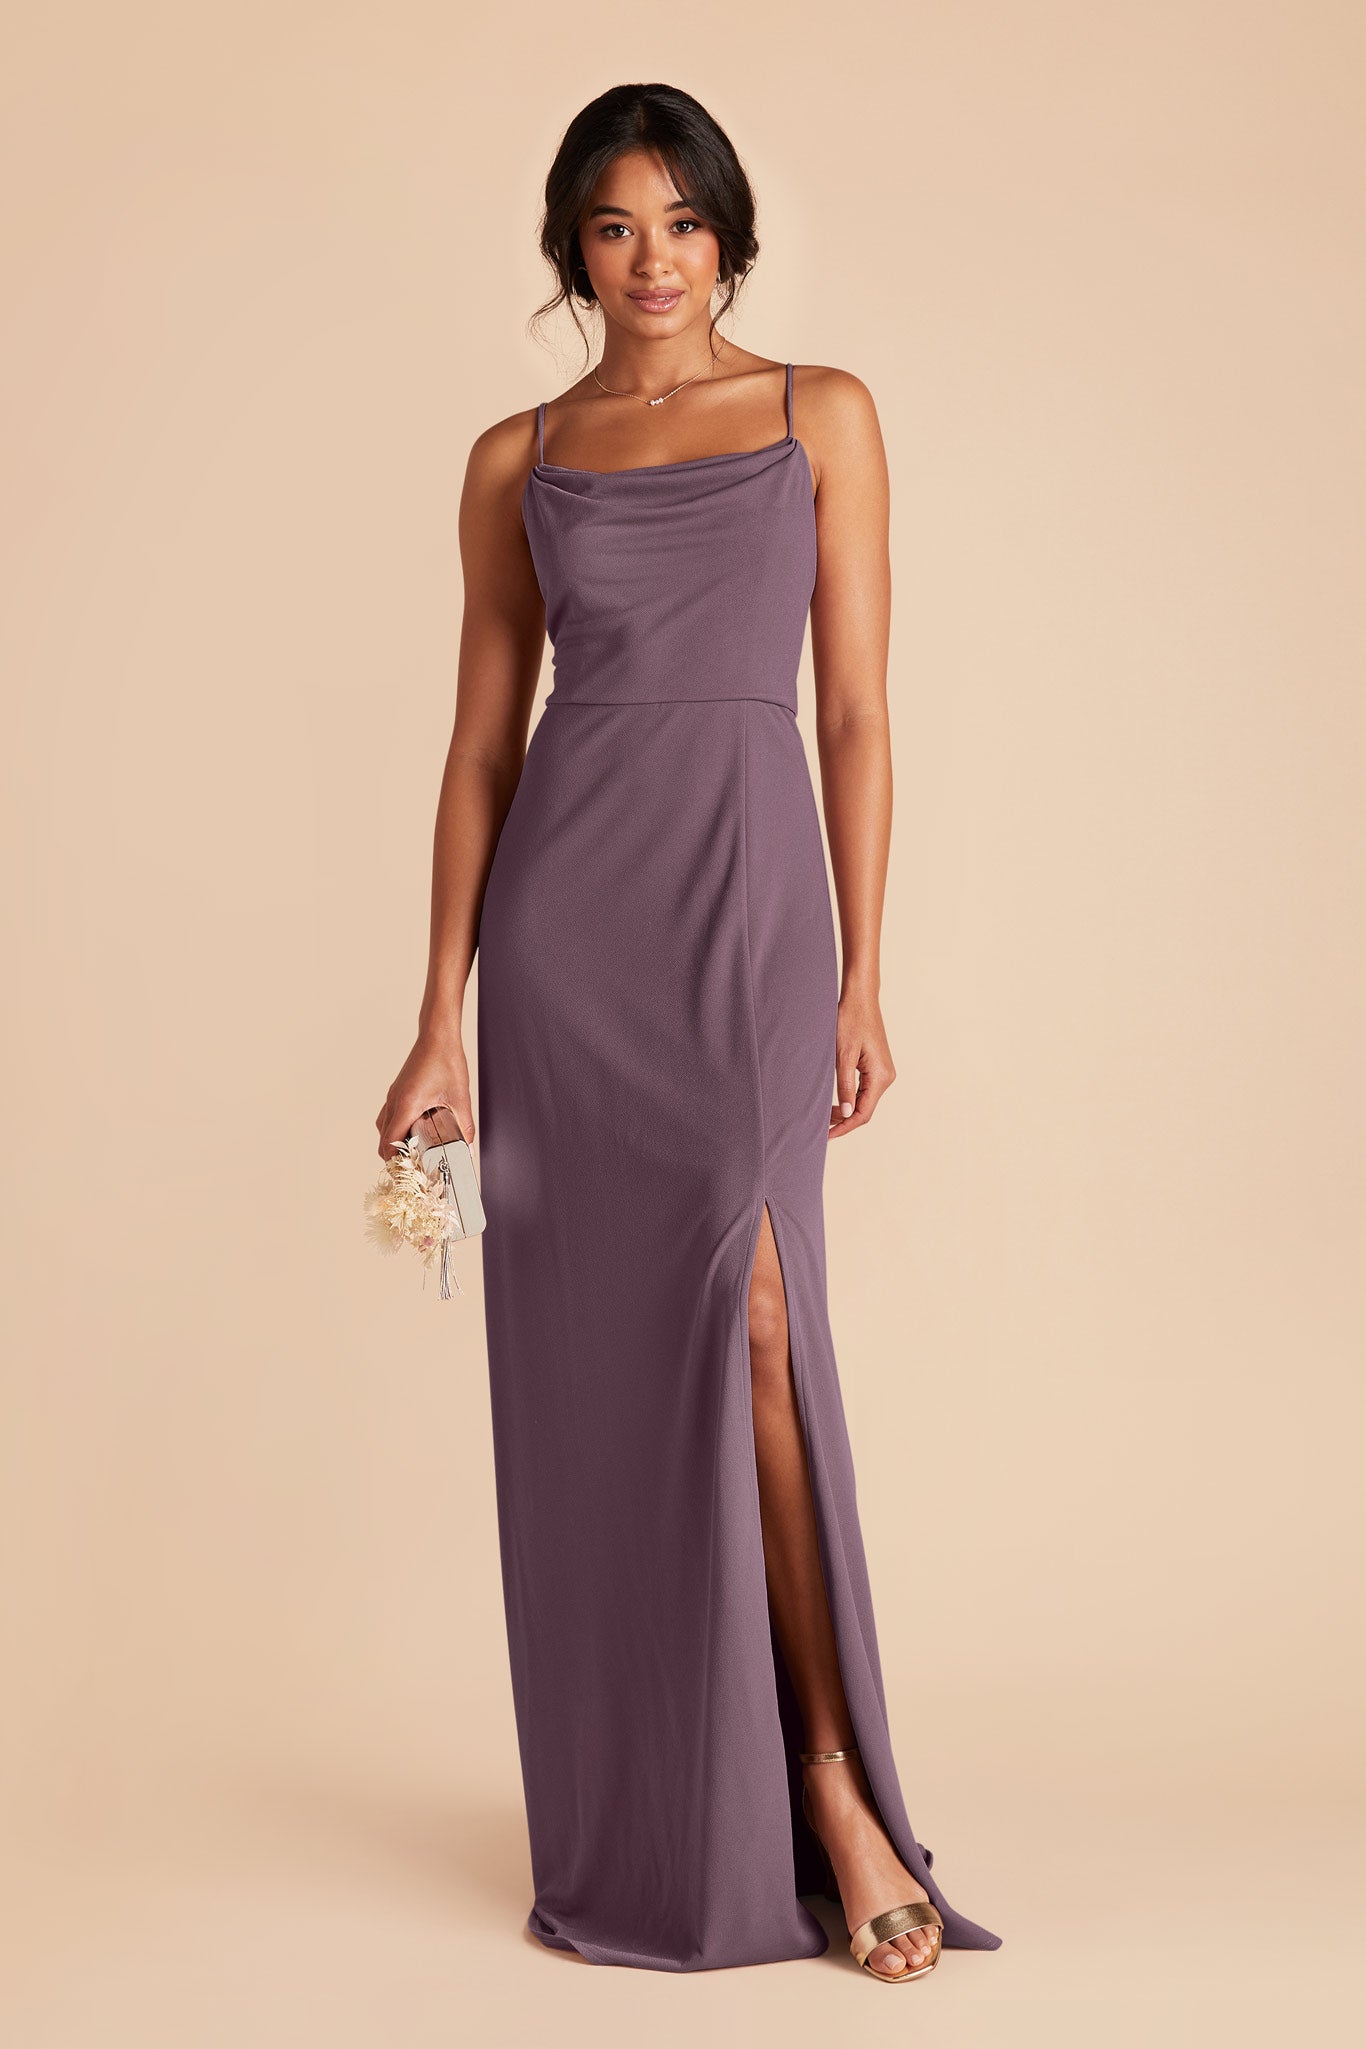 Plum Ash dress in crepe by Birdy Grey